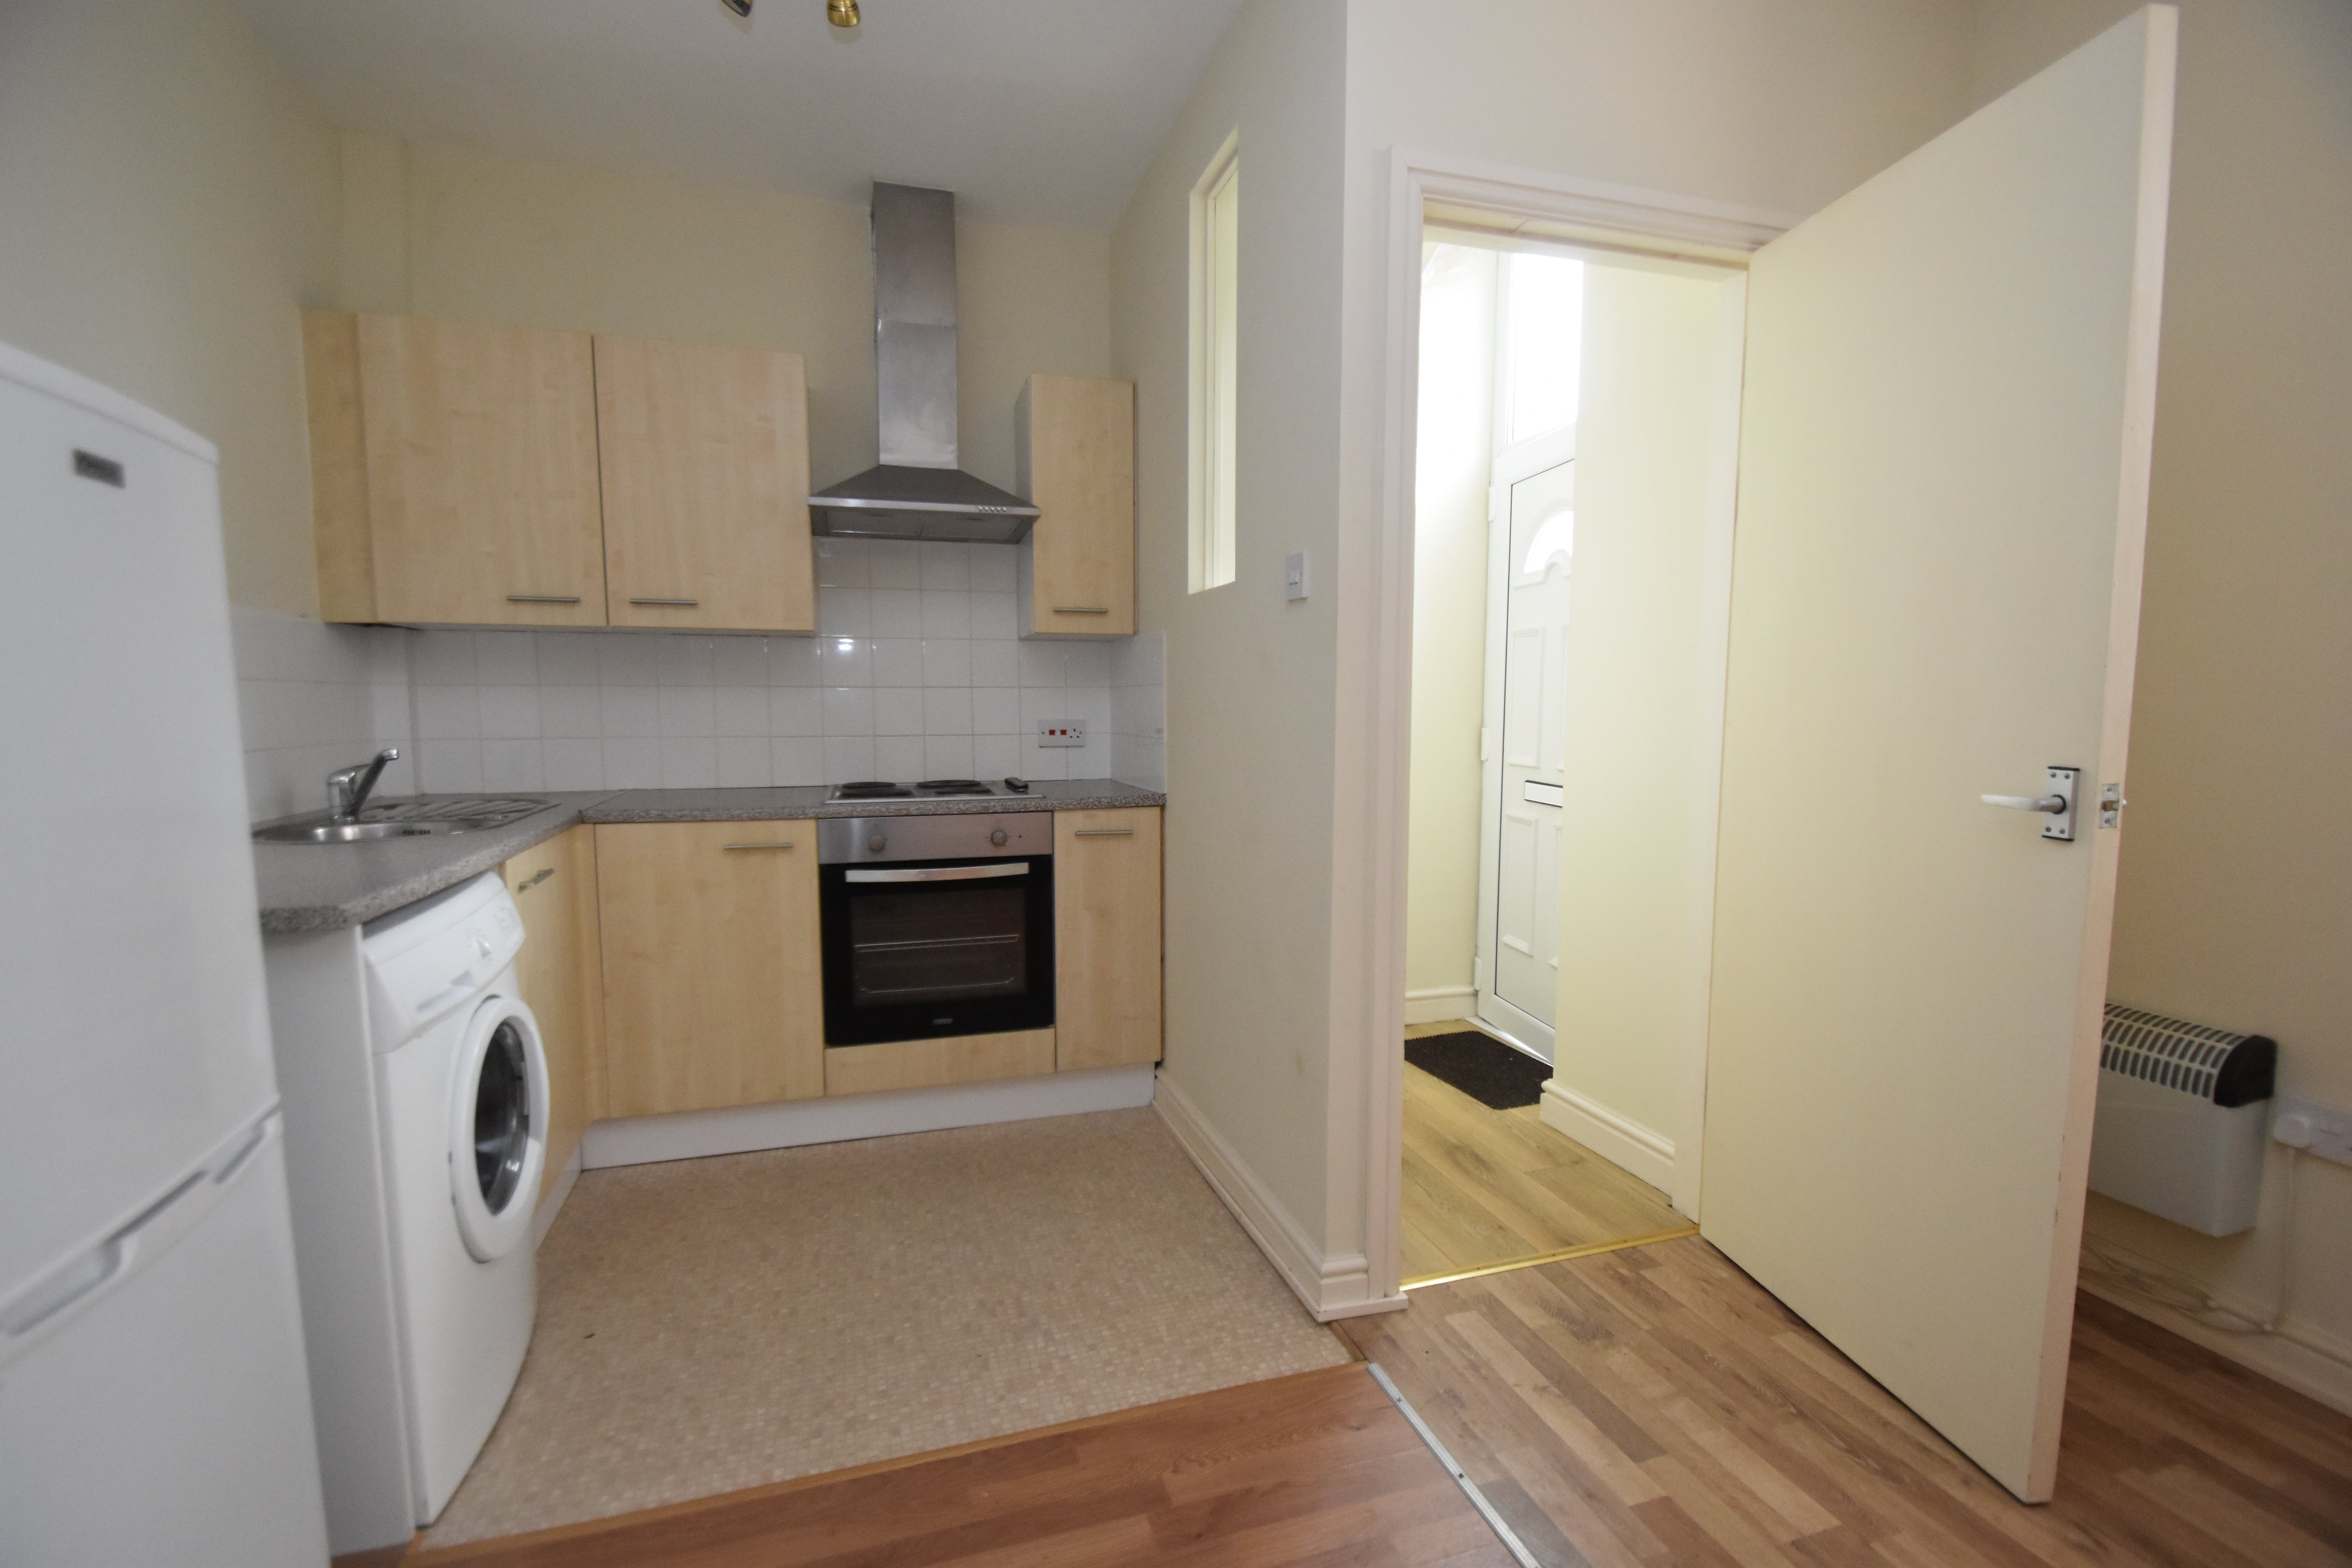 1 bed flat to rent in Piercefield Place, ADAMSDOWN 5